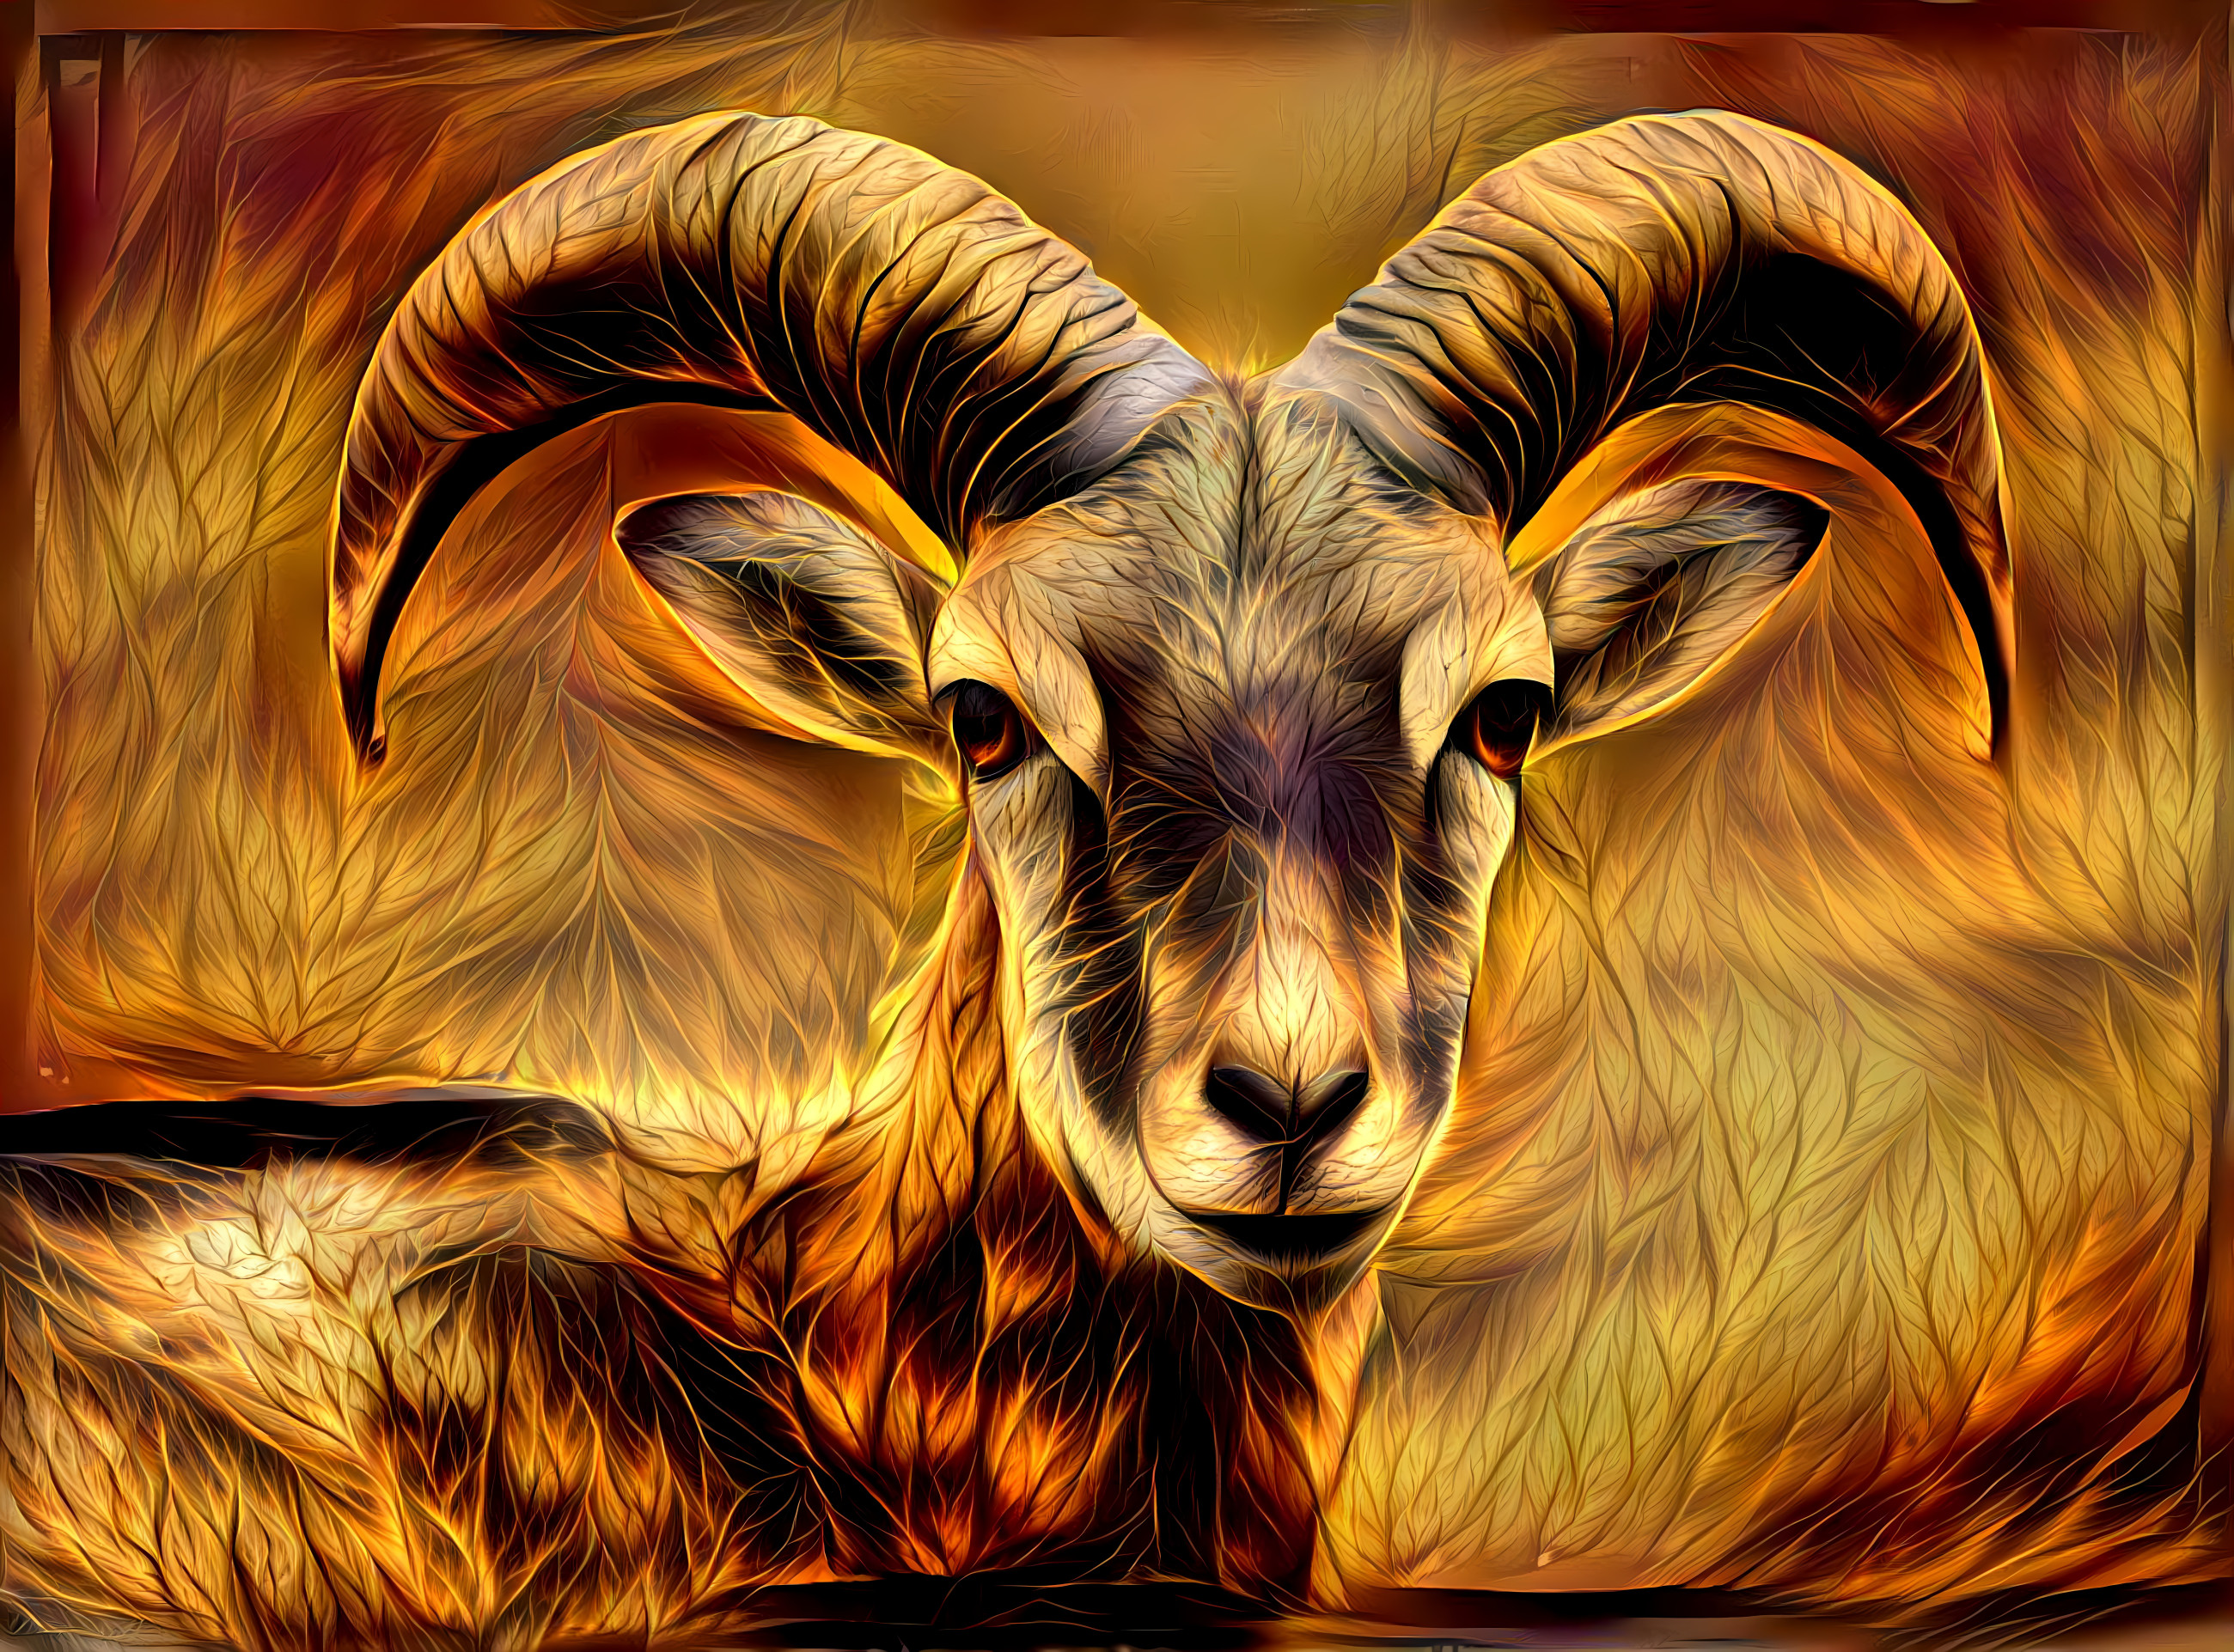 Sheep with horns